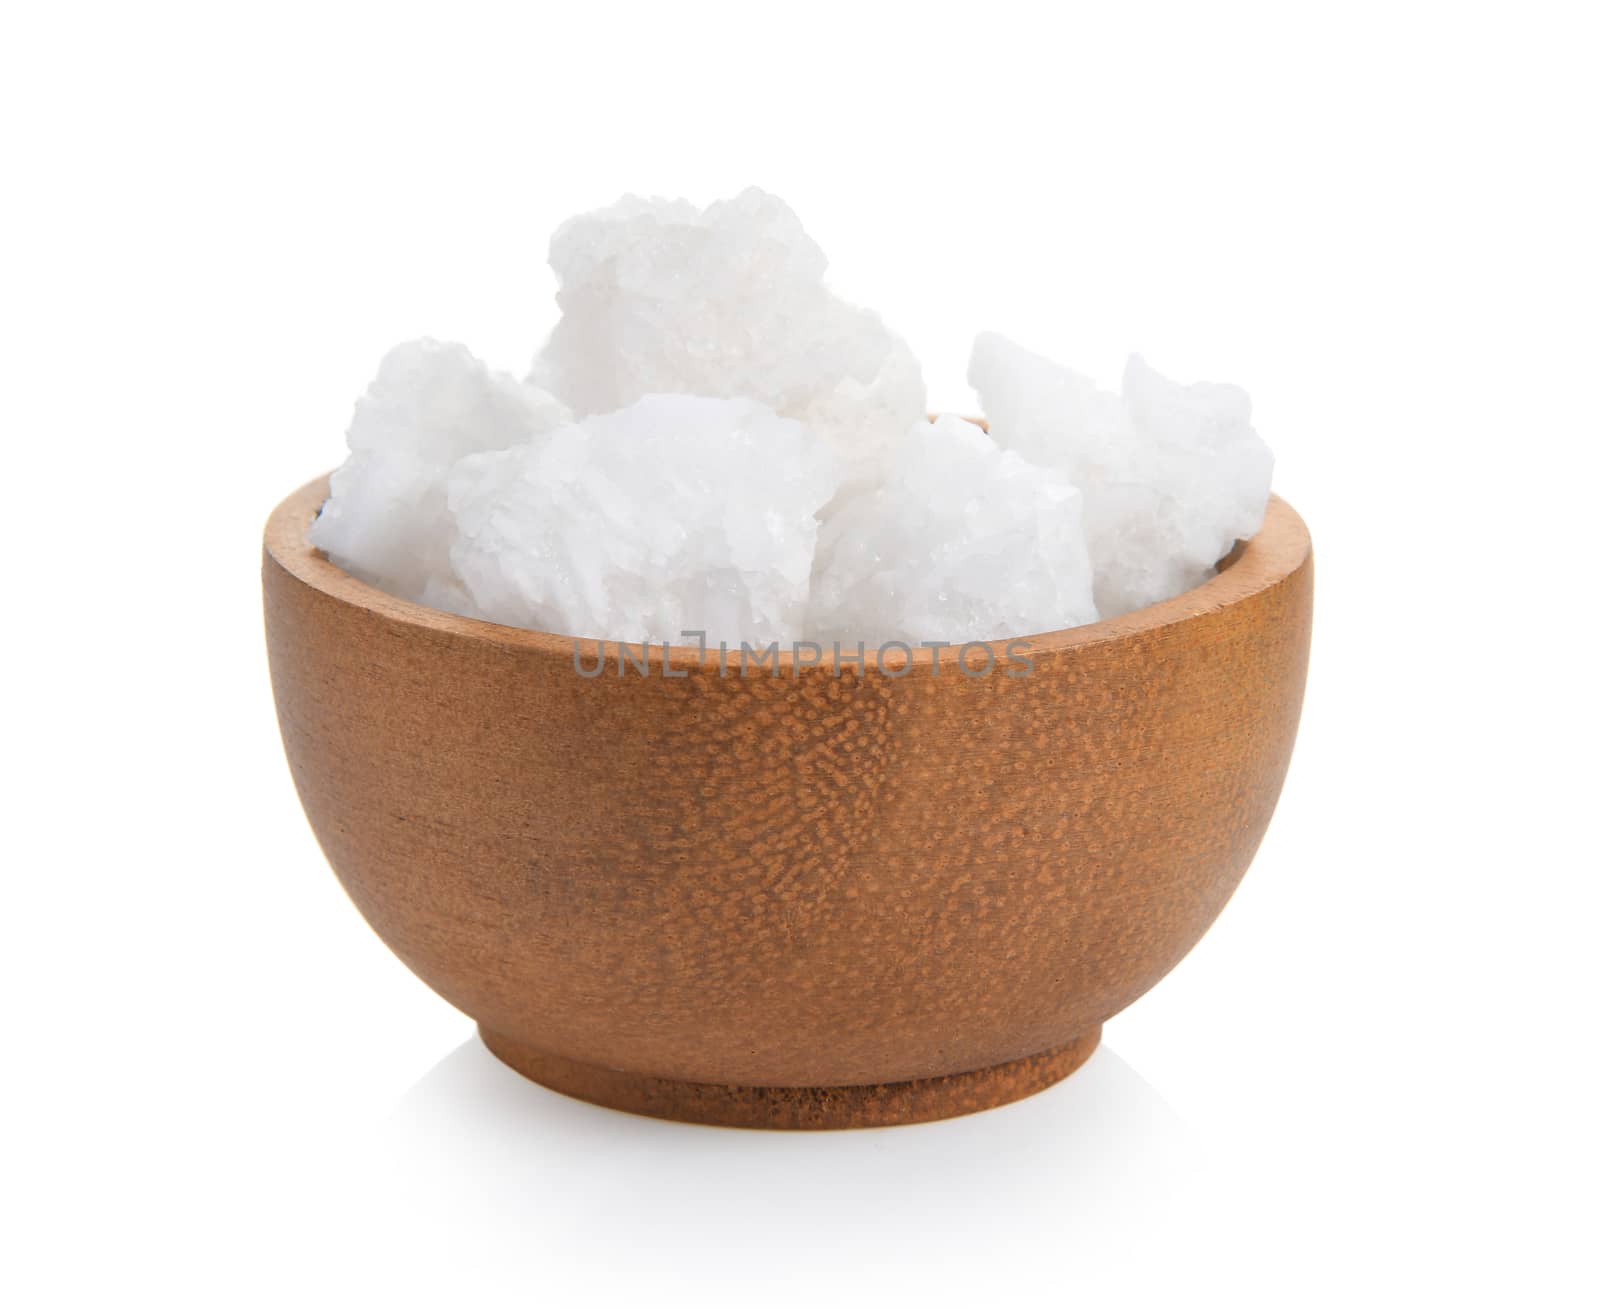 salt in wood bowl on white background by sommai